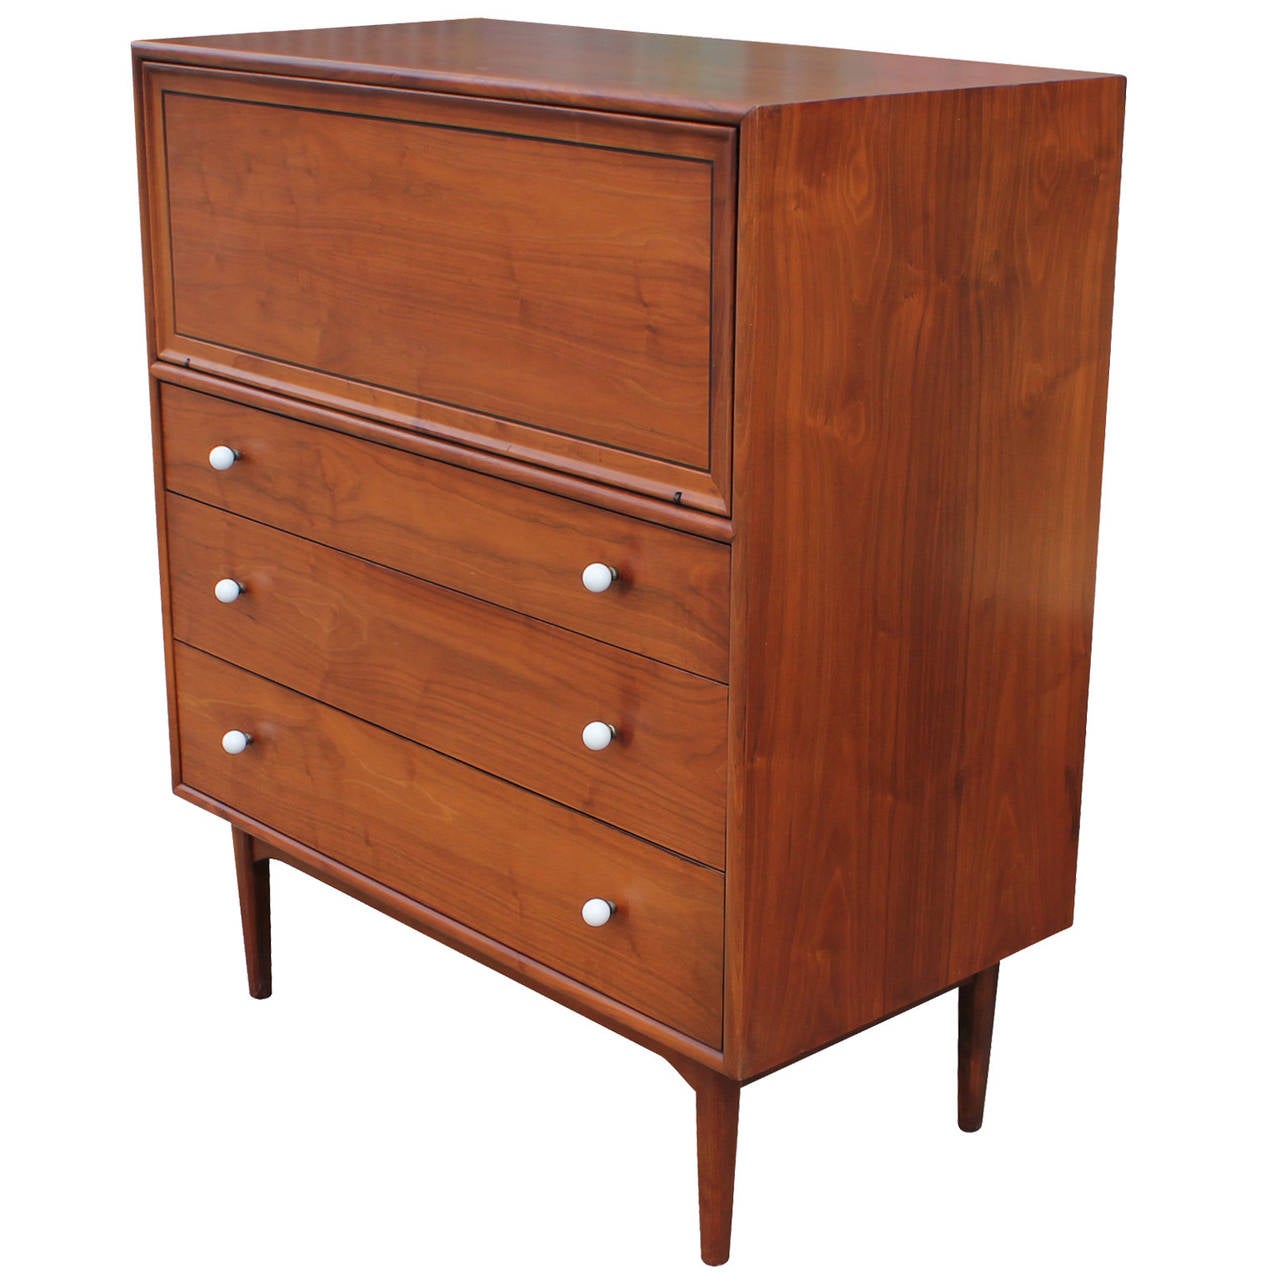 Beautiful Kipp Stewart for Drexel figured walnut dresser with white porcelain knobs. The dresser was made in 1961 and is the Declaration line. It is in excellent restored condition.